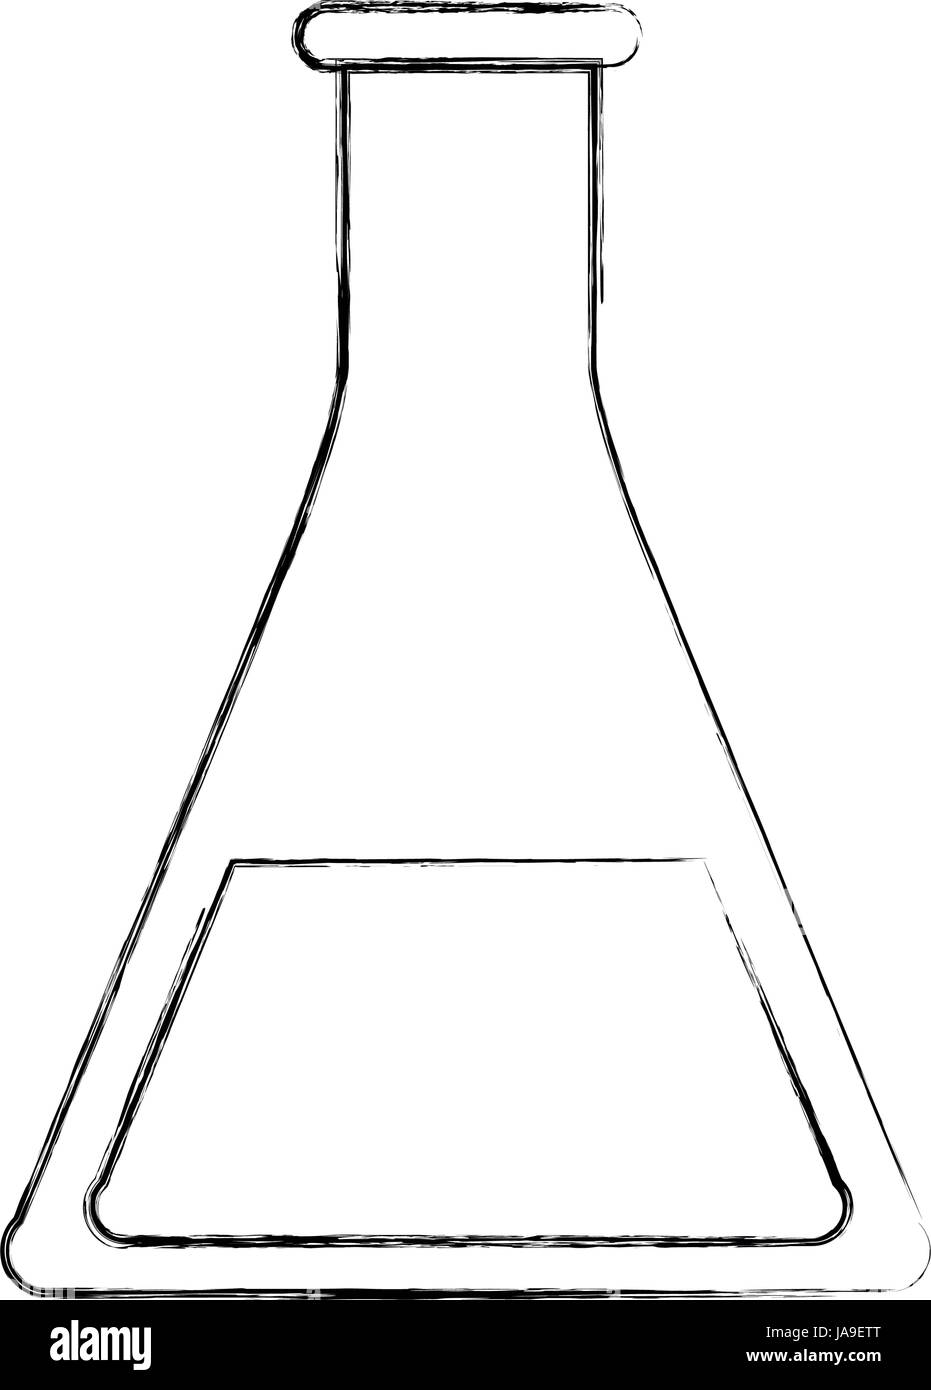 Chemical laboratory equipment sketch. Hand drawn glass beaker illustration.  Chemical and alchemy lab glassware drawing. Vector beaker for science  experiments or alchemy.:: موقع تصميمي